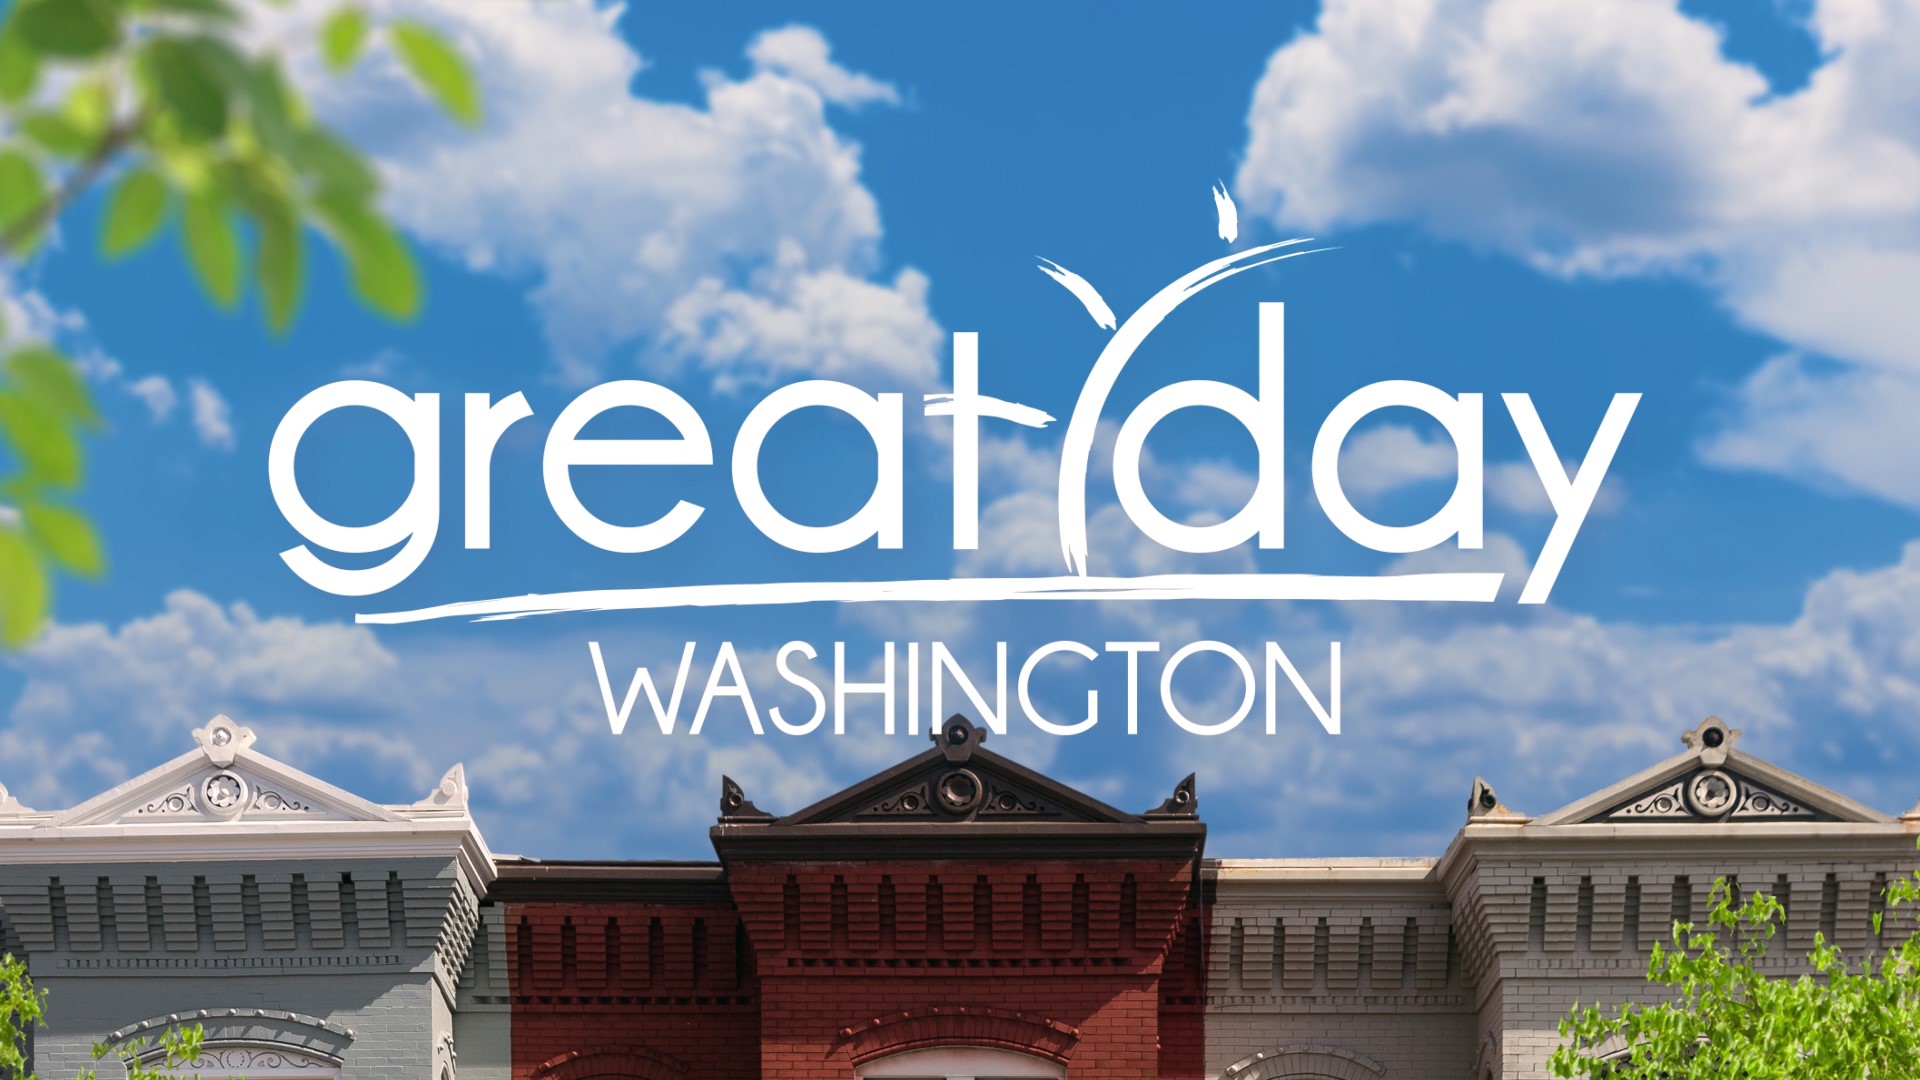 The most exciting and entertaining places, events and experiences that can be found in and around the Washington, D.C., area are presented.